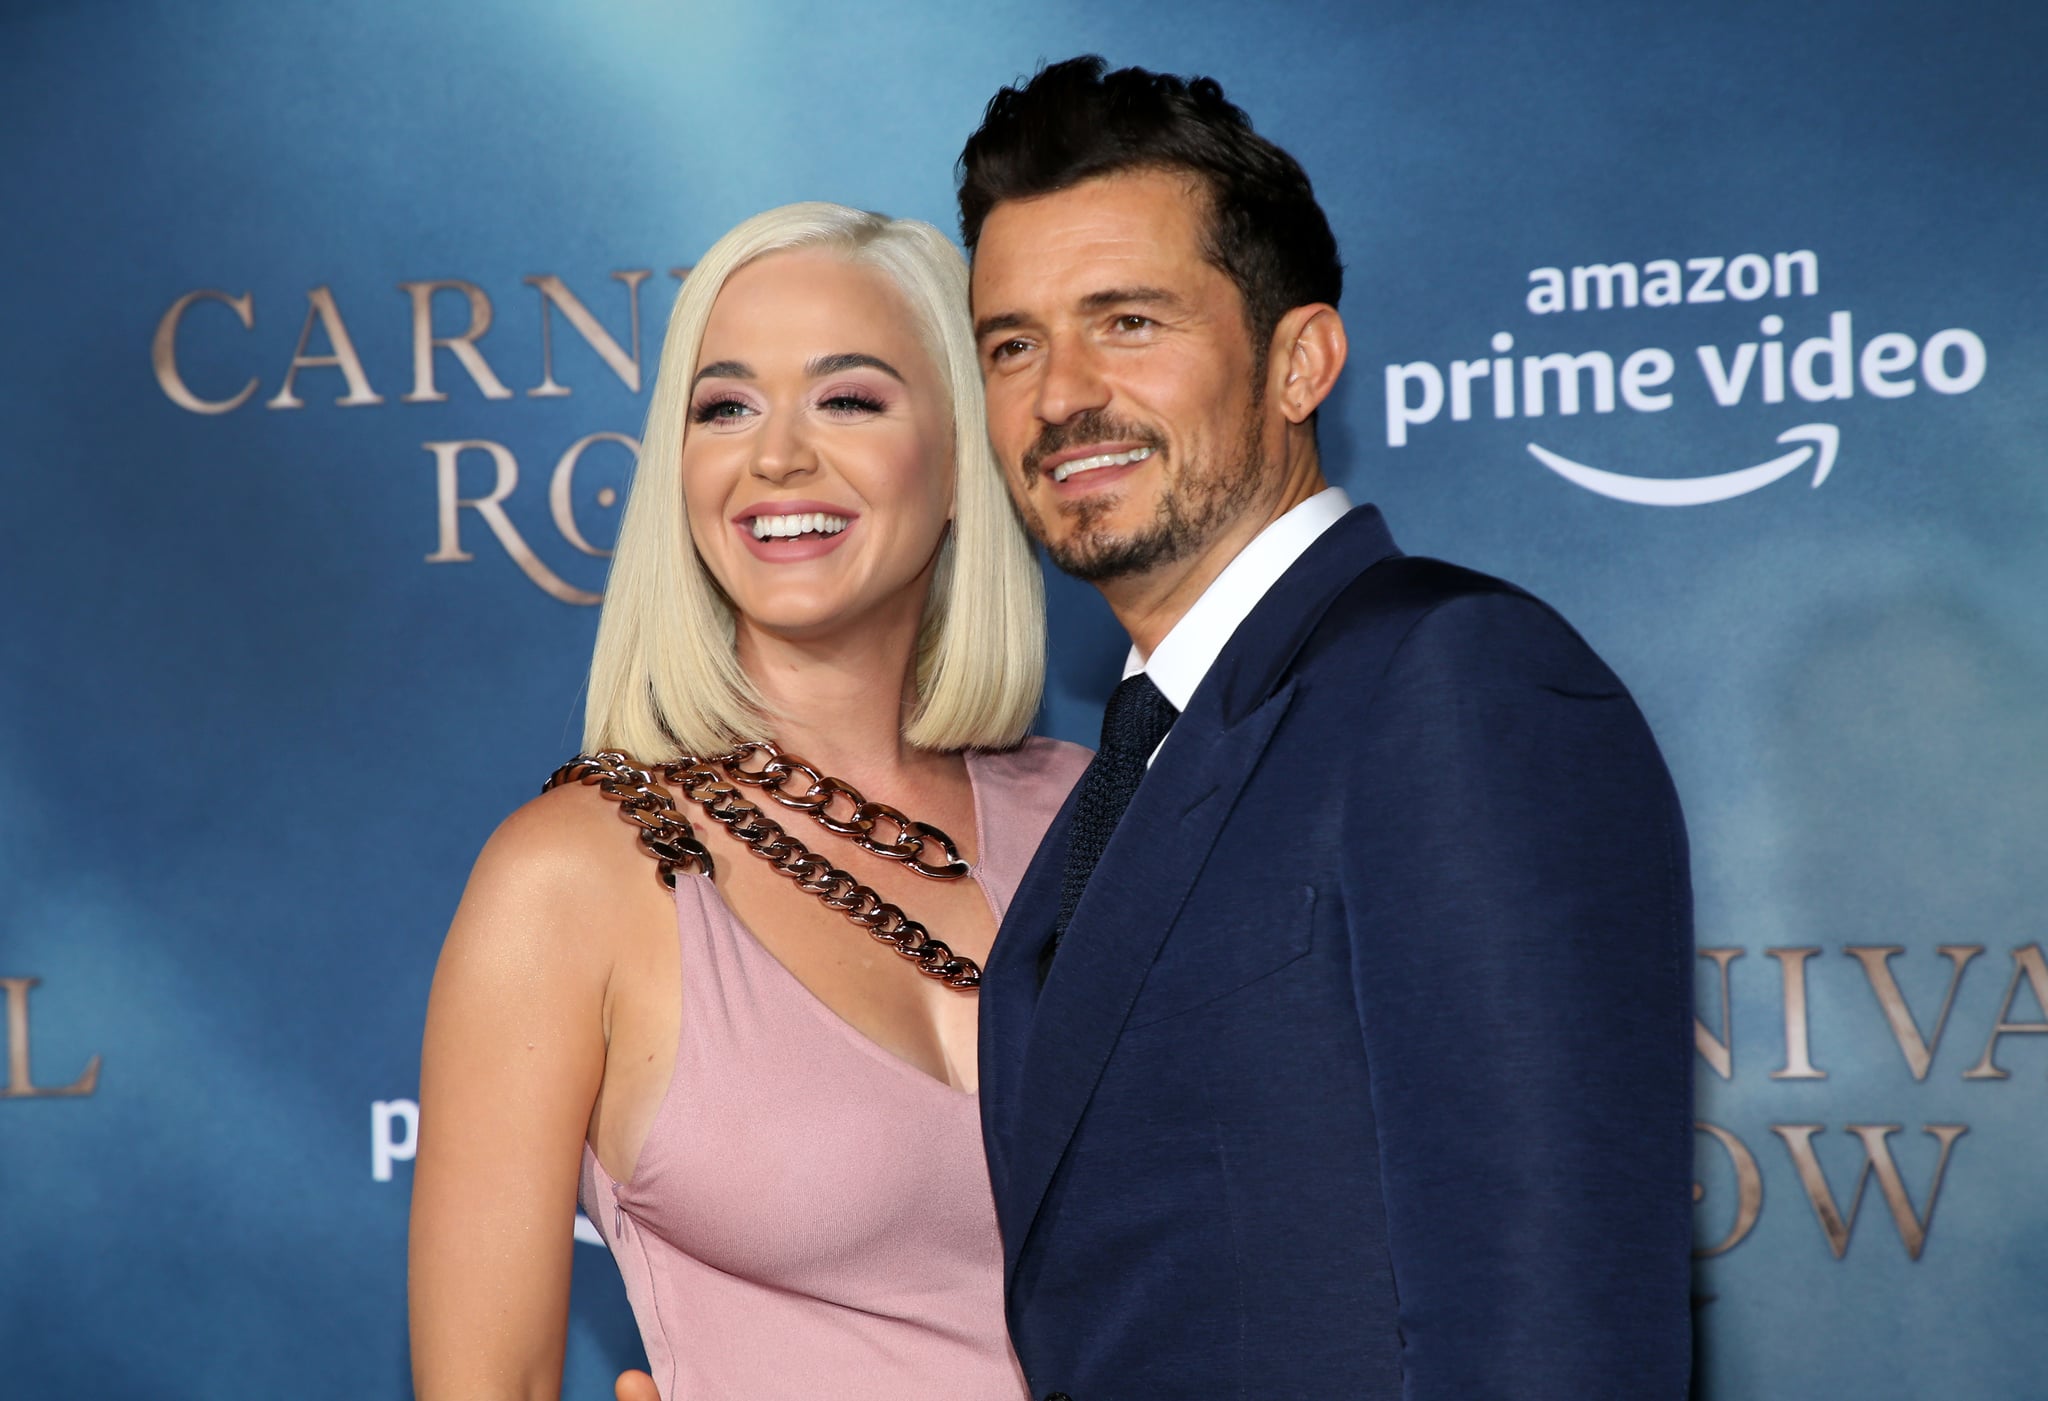 HOLLYWOOD, CALIFORNIA - AUGUST 21: Katy Perry and Orlando Bloom attend the LA premiere of Amazon